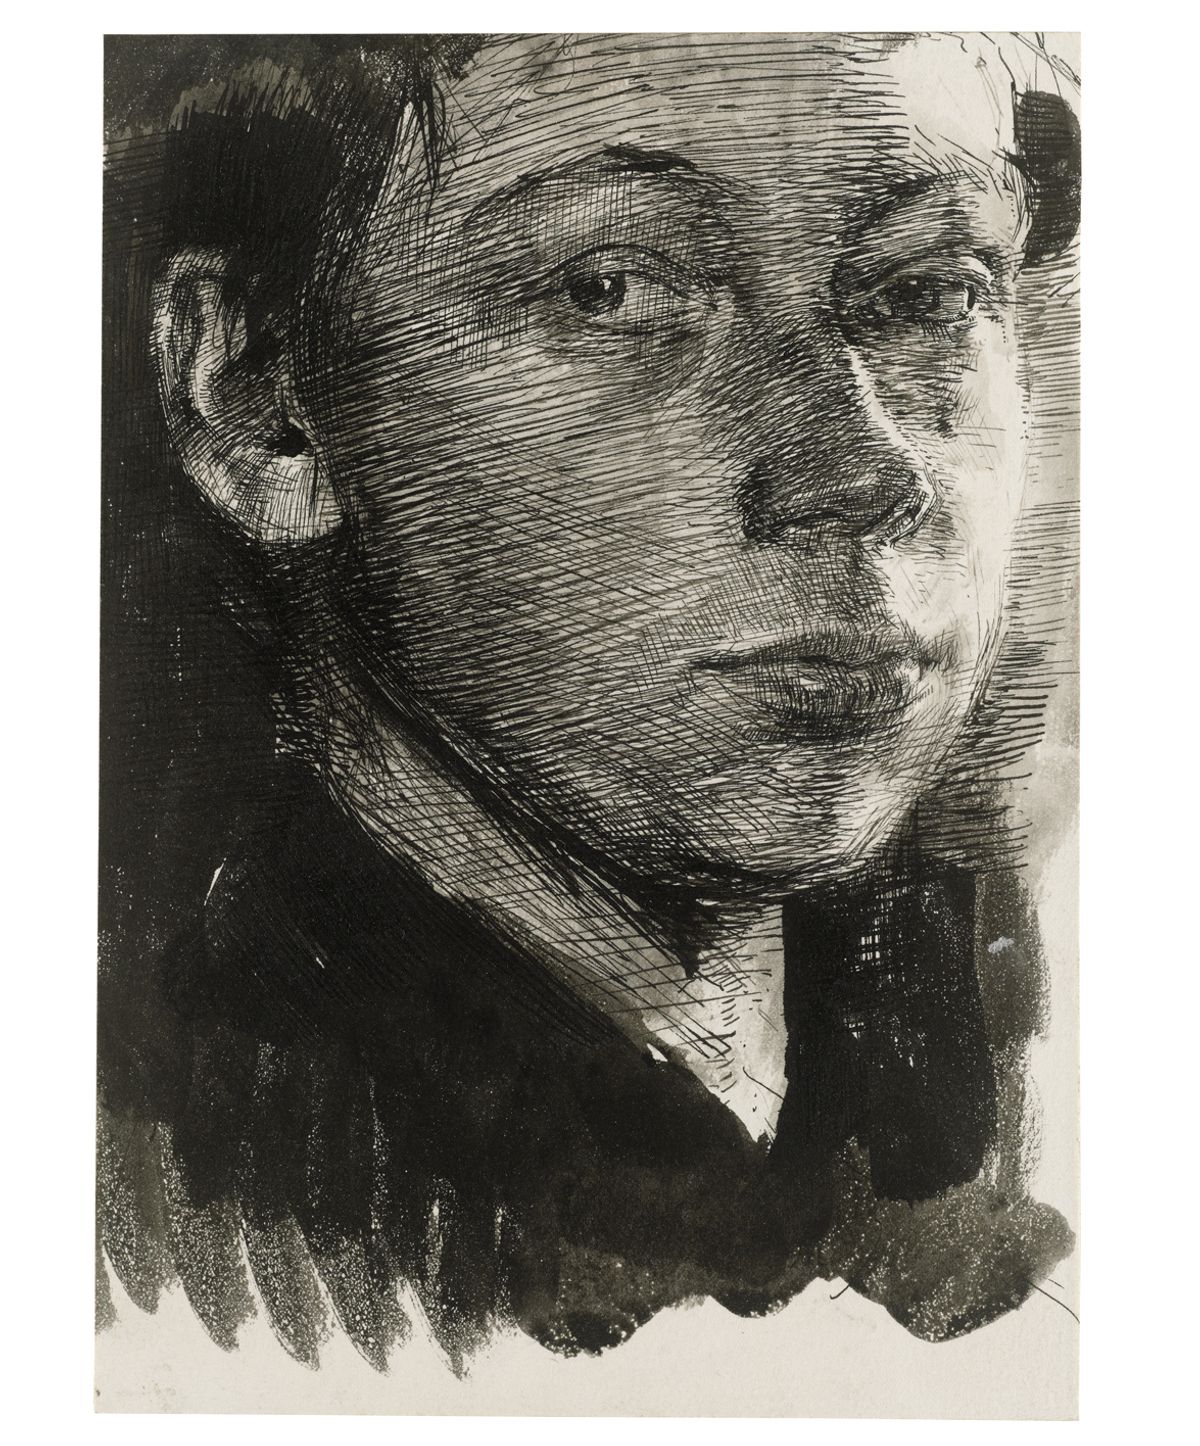 Käthe Kollwitz, Self-Portrait turned half right (around 1890). An early drawing when the artist was emerging from the student; enquiring, confident and diffident, curious and charming. Talent so evident Courtesy of the Kupferstich-Kabinett, Staatliche Kunstsammlung Dresden